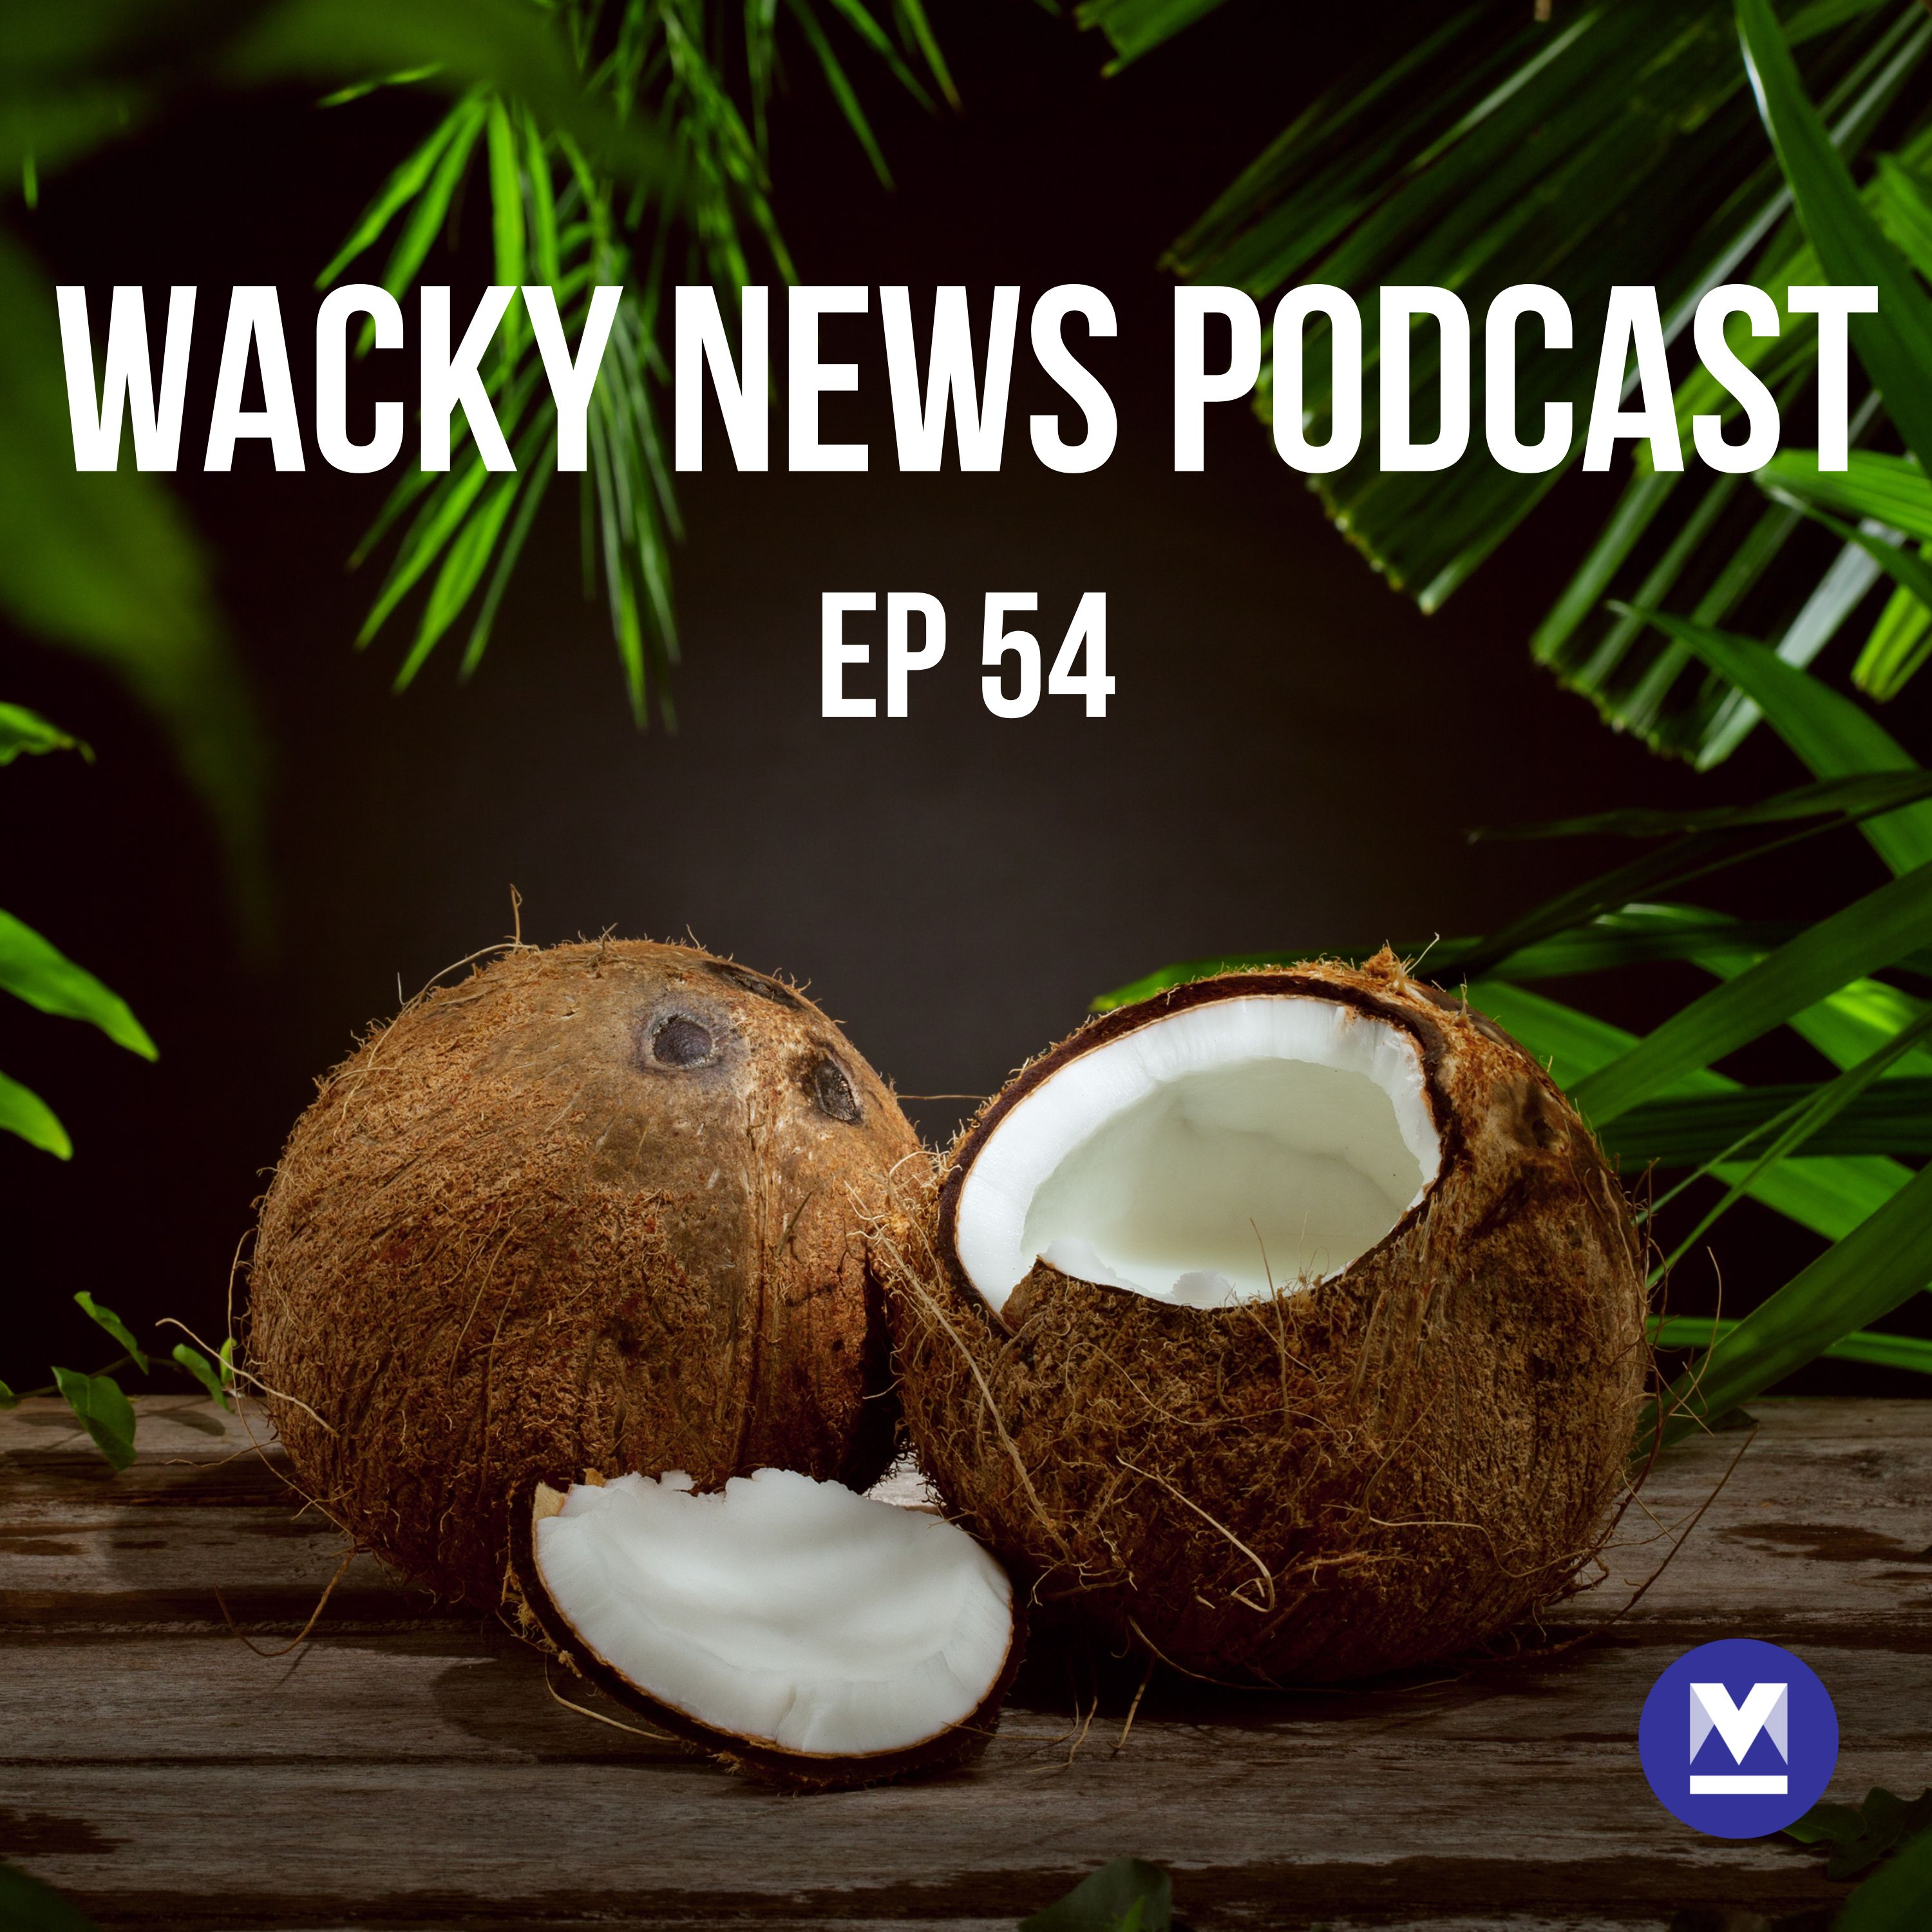 Wacky News: Coconut diet, remote kissing and lonely whales | Ep 54